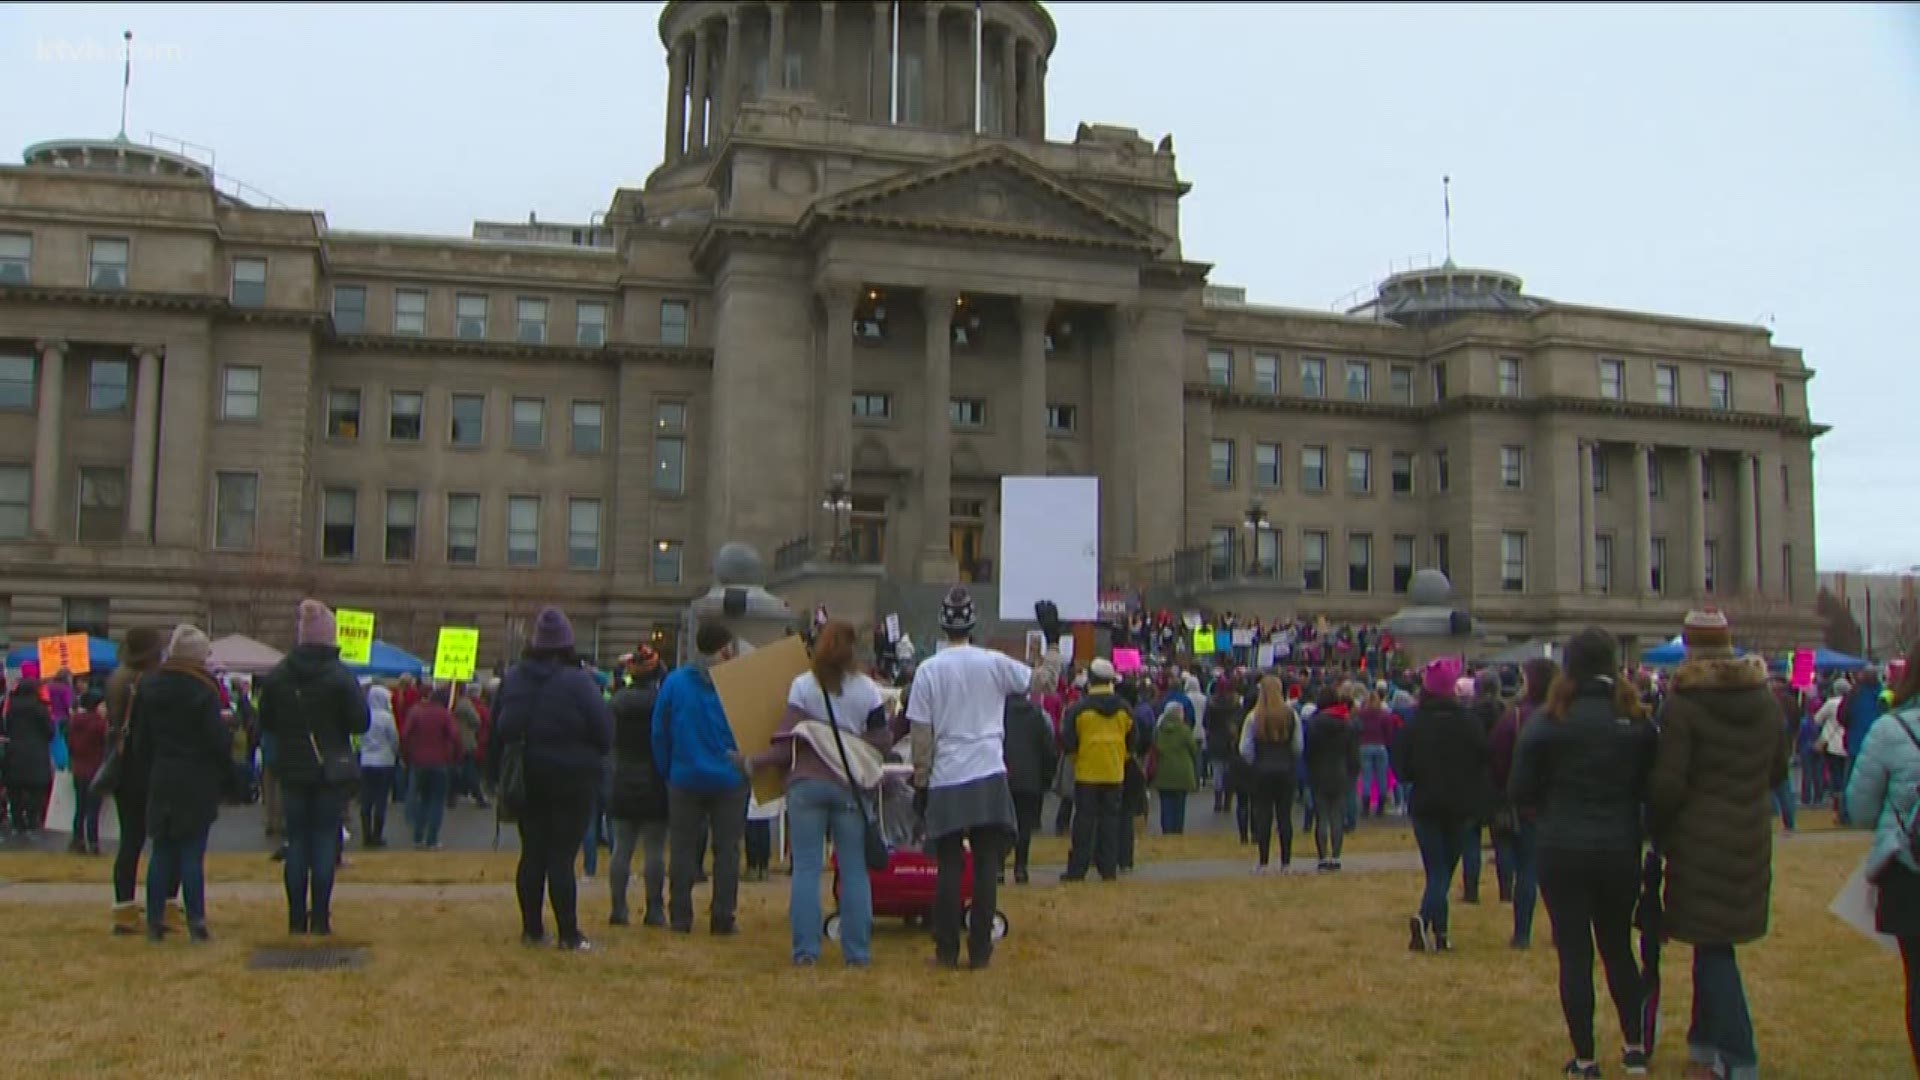 Thousands marched to the State House, but not without carrying ongoing controversies.